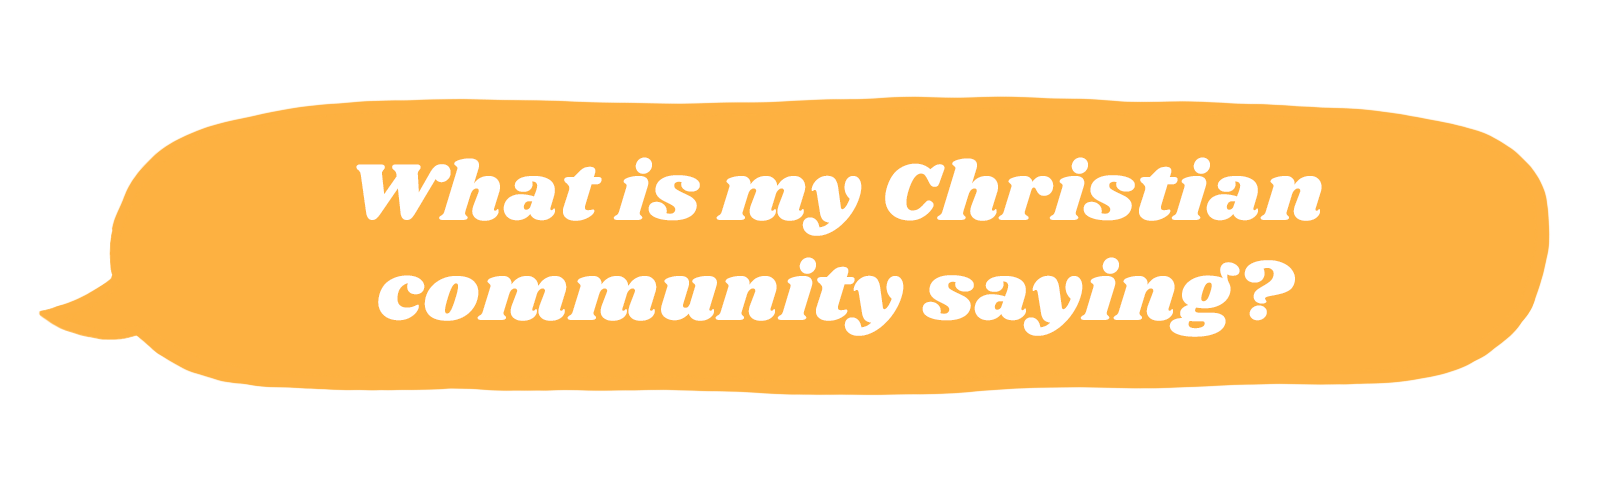 What is my Christian community saying?